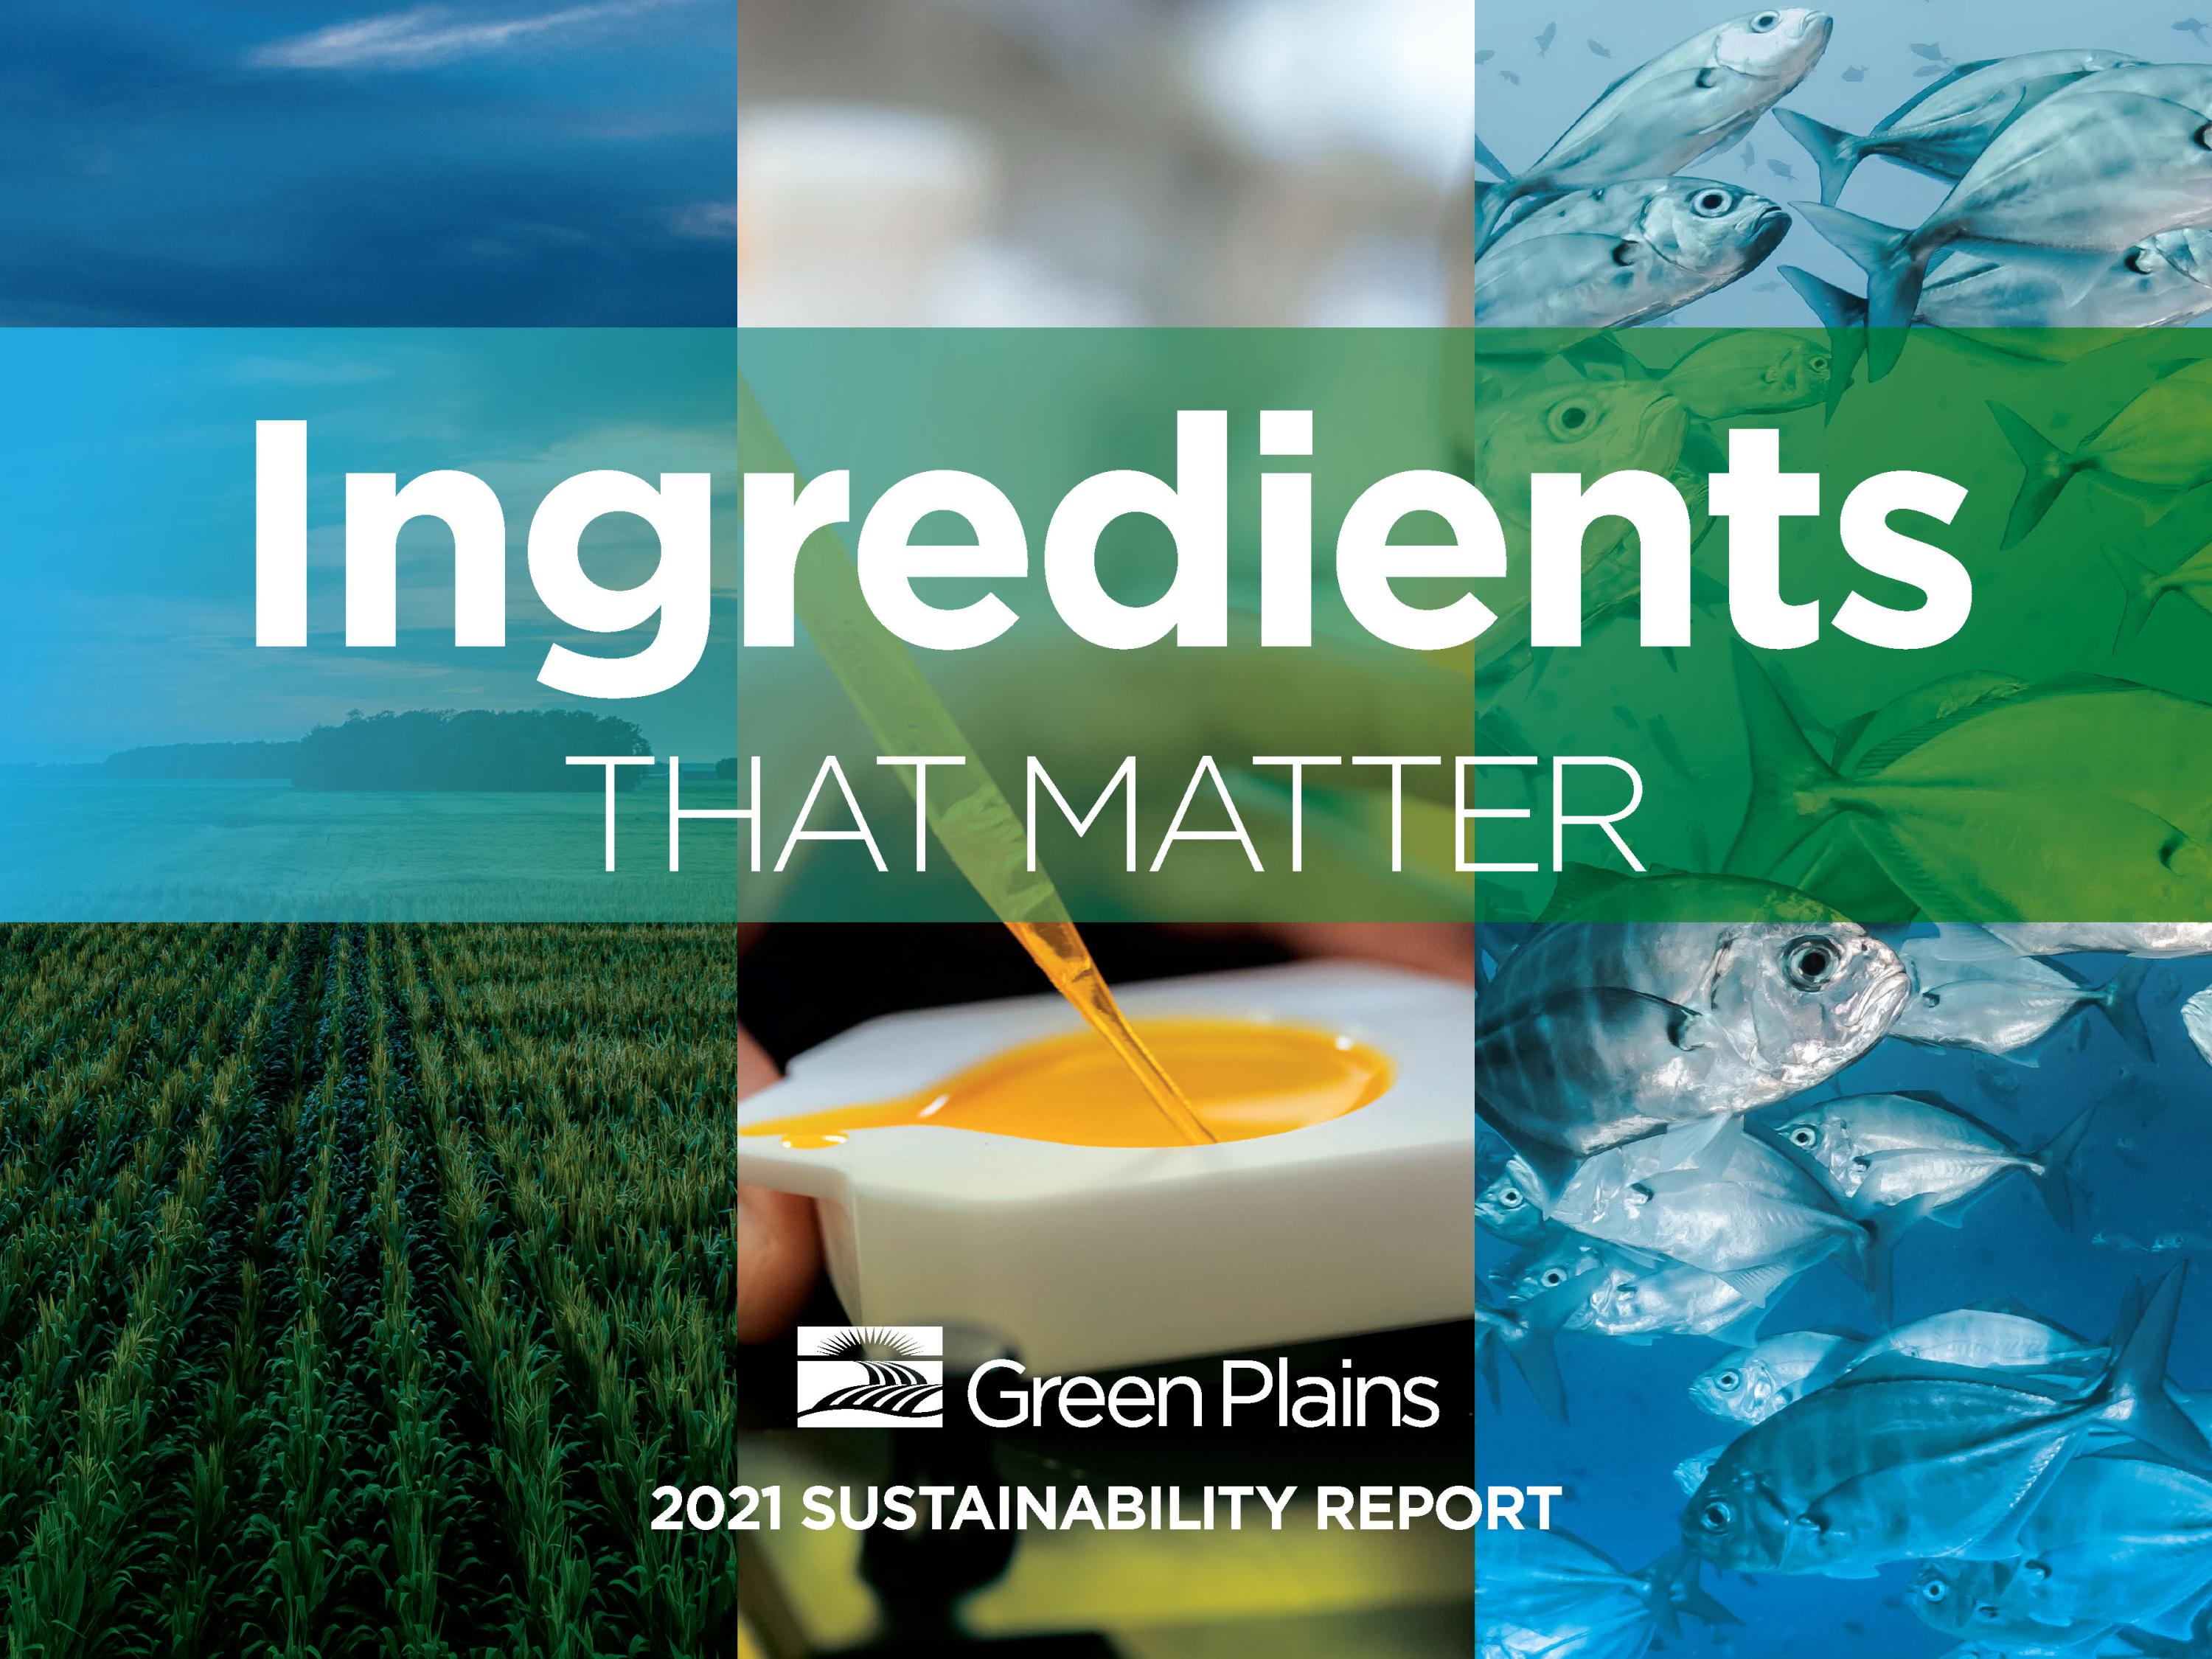 "Ingredients that Matter" imposed over crops, fish and lab equipment